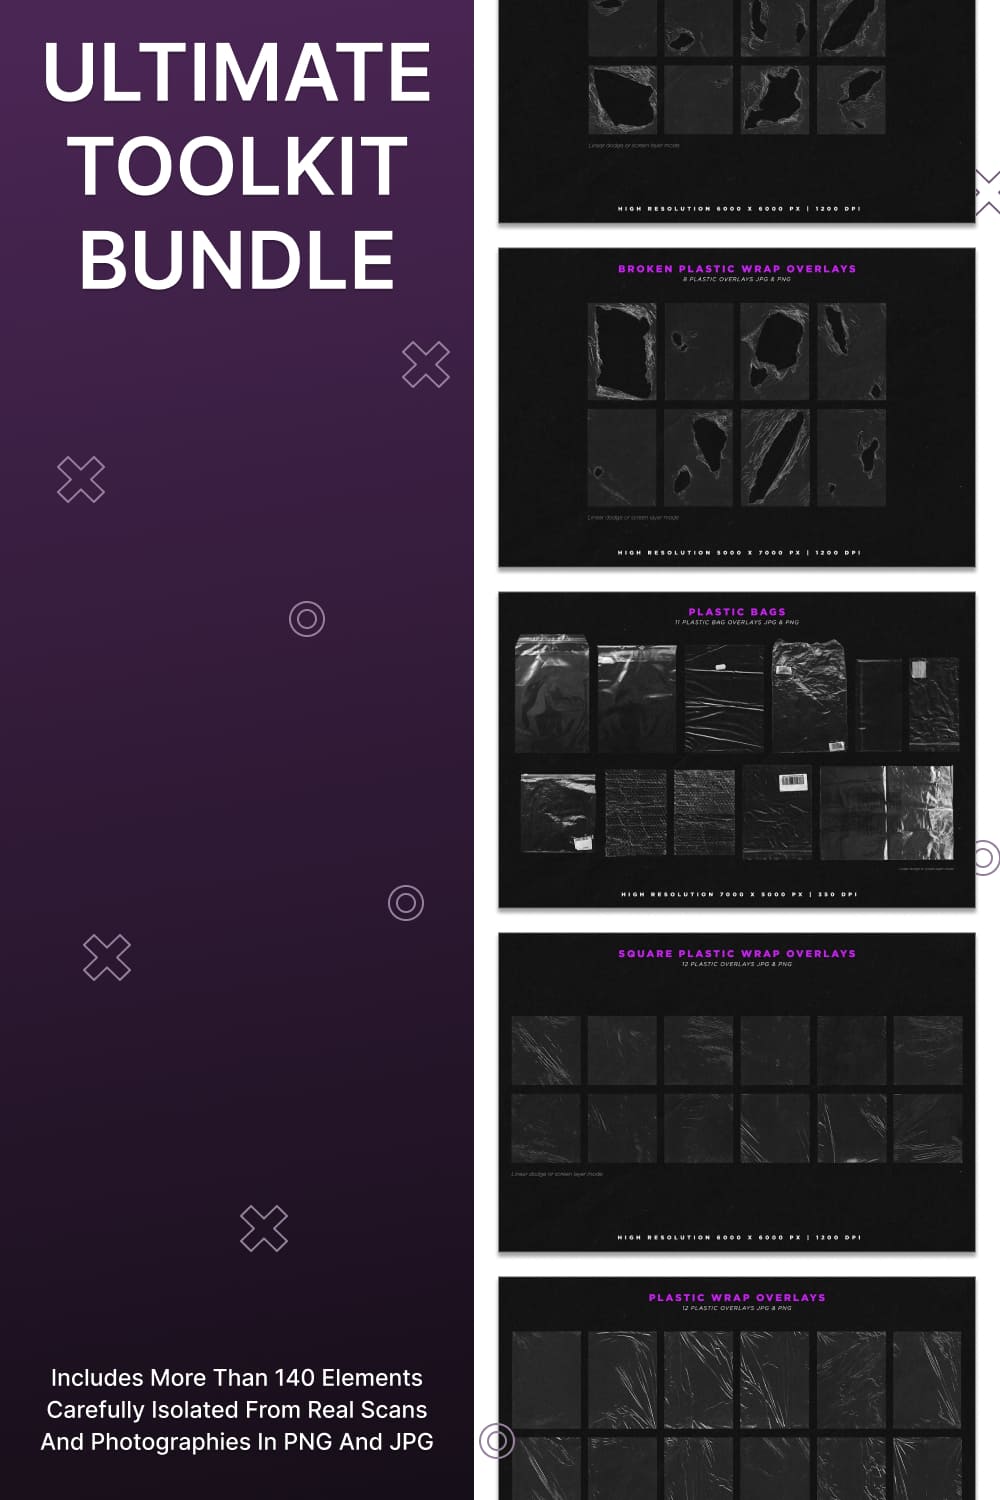 Ultimate toolkit bundle - pinterest image preview.